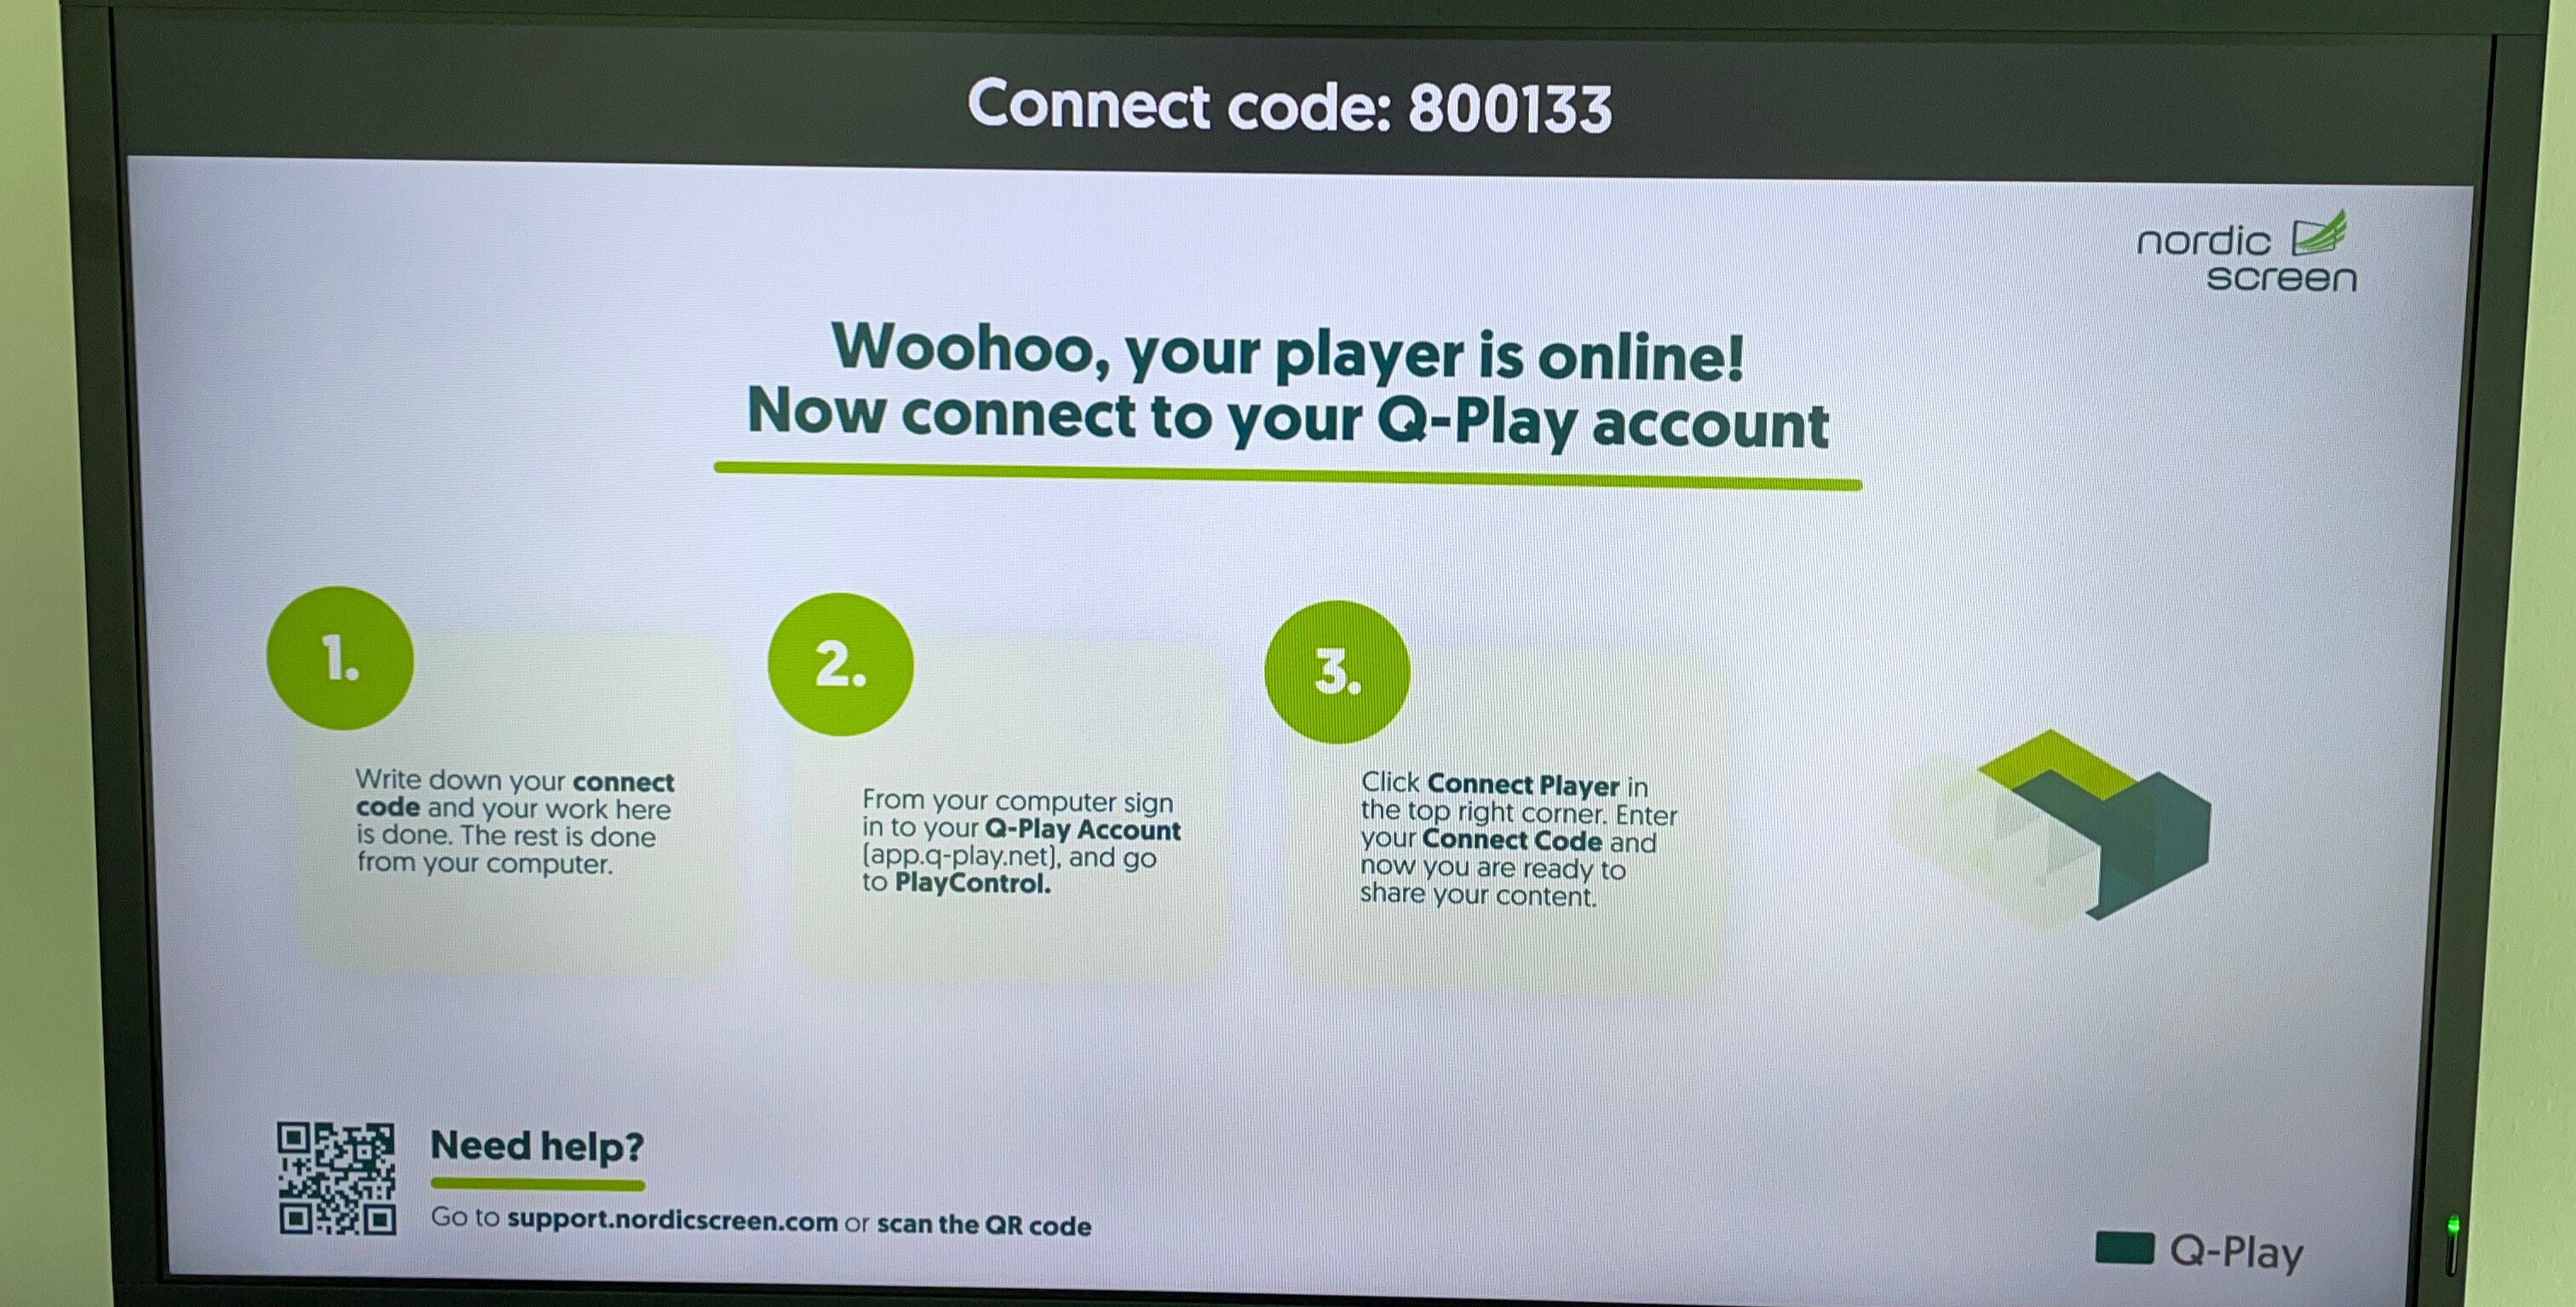 Screen displaying connection instructions for Q-Play Player with connect code 800133 and steps to connect to a Q-Play account.